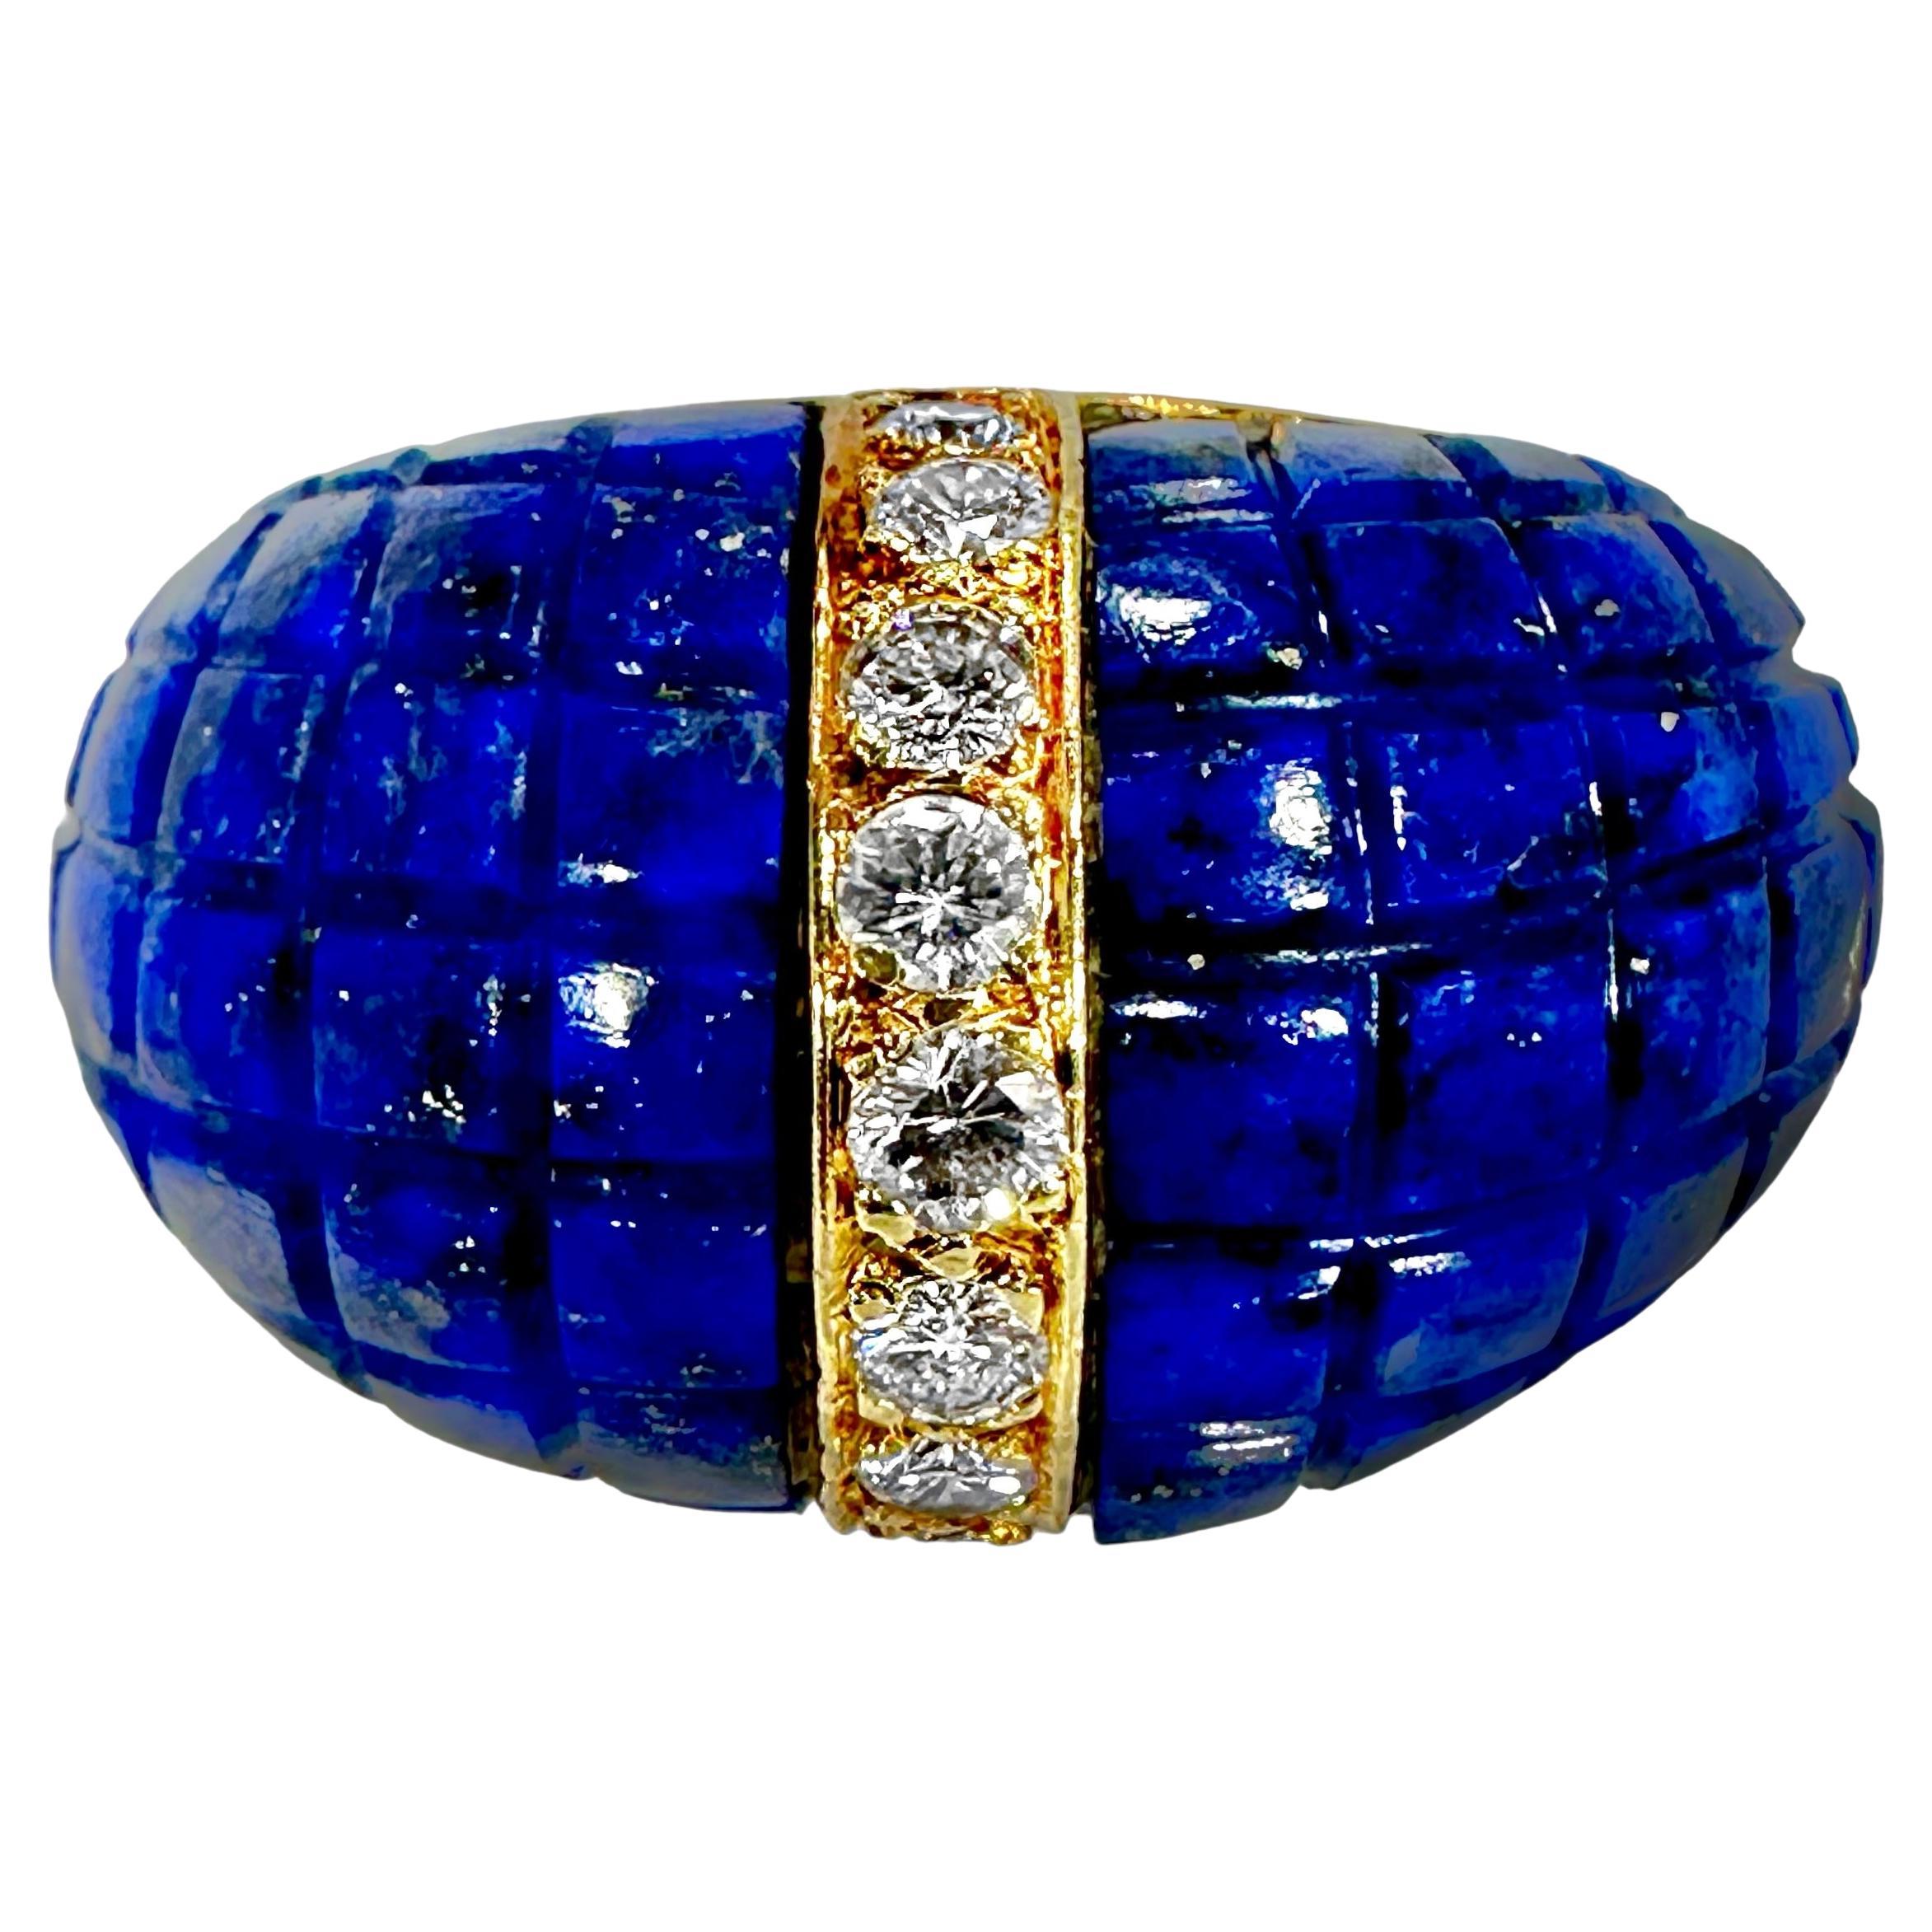 Exquisitely Crafted Italian 18K Yellow Gold, Lapis Lazuli, and Diamond Ring